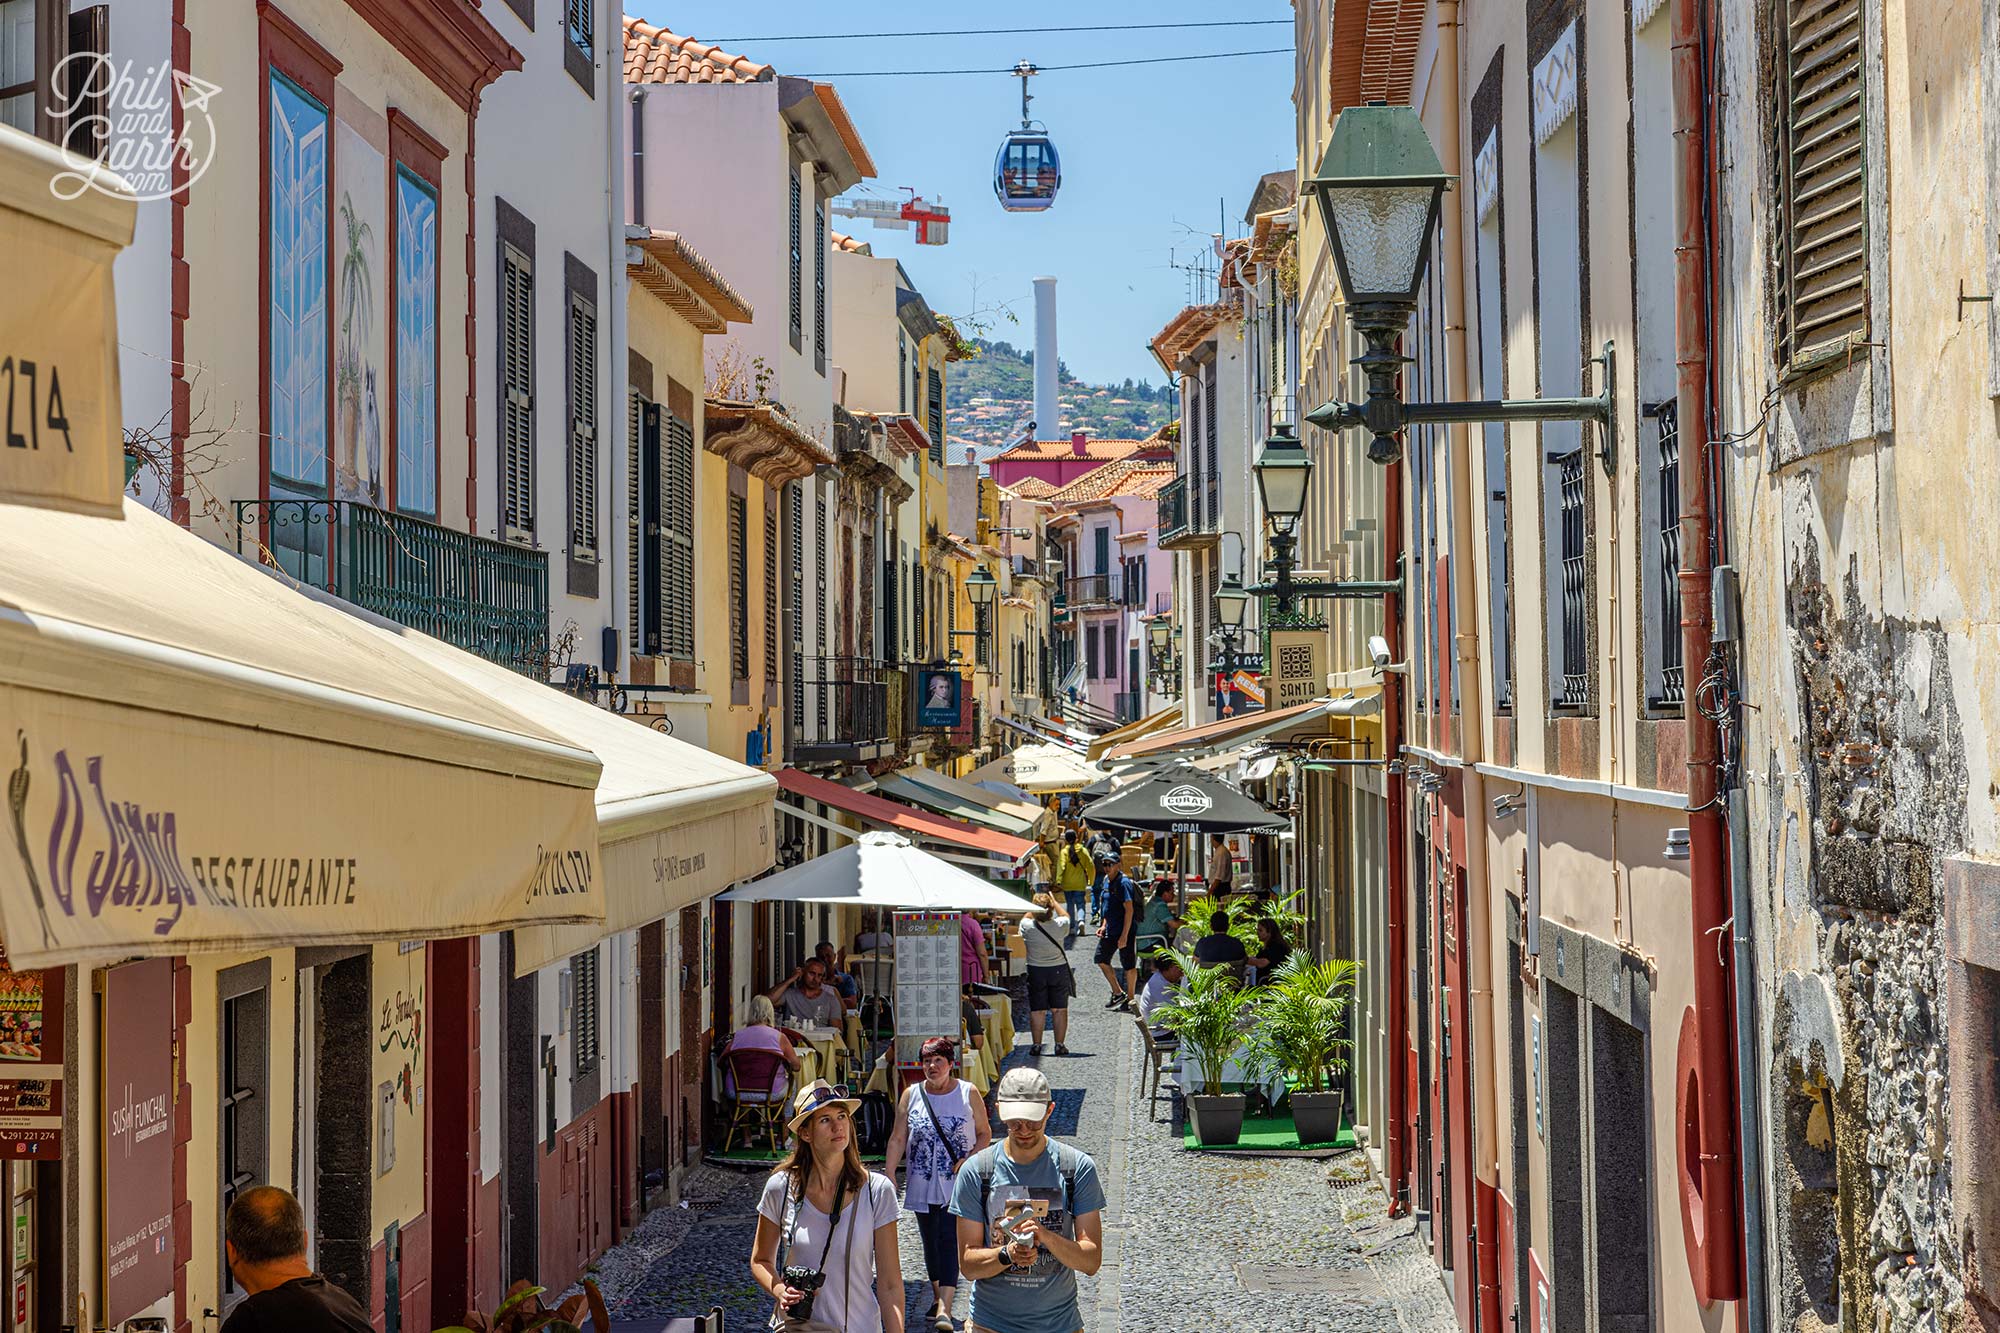 10 Great Things To Do In Funchal, Madeira - Phil and Garth